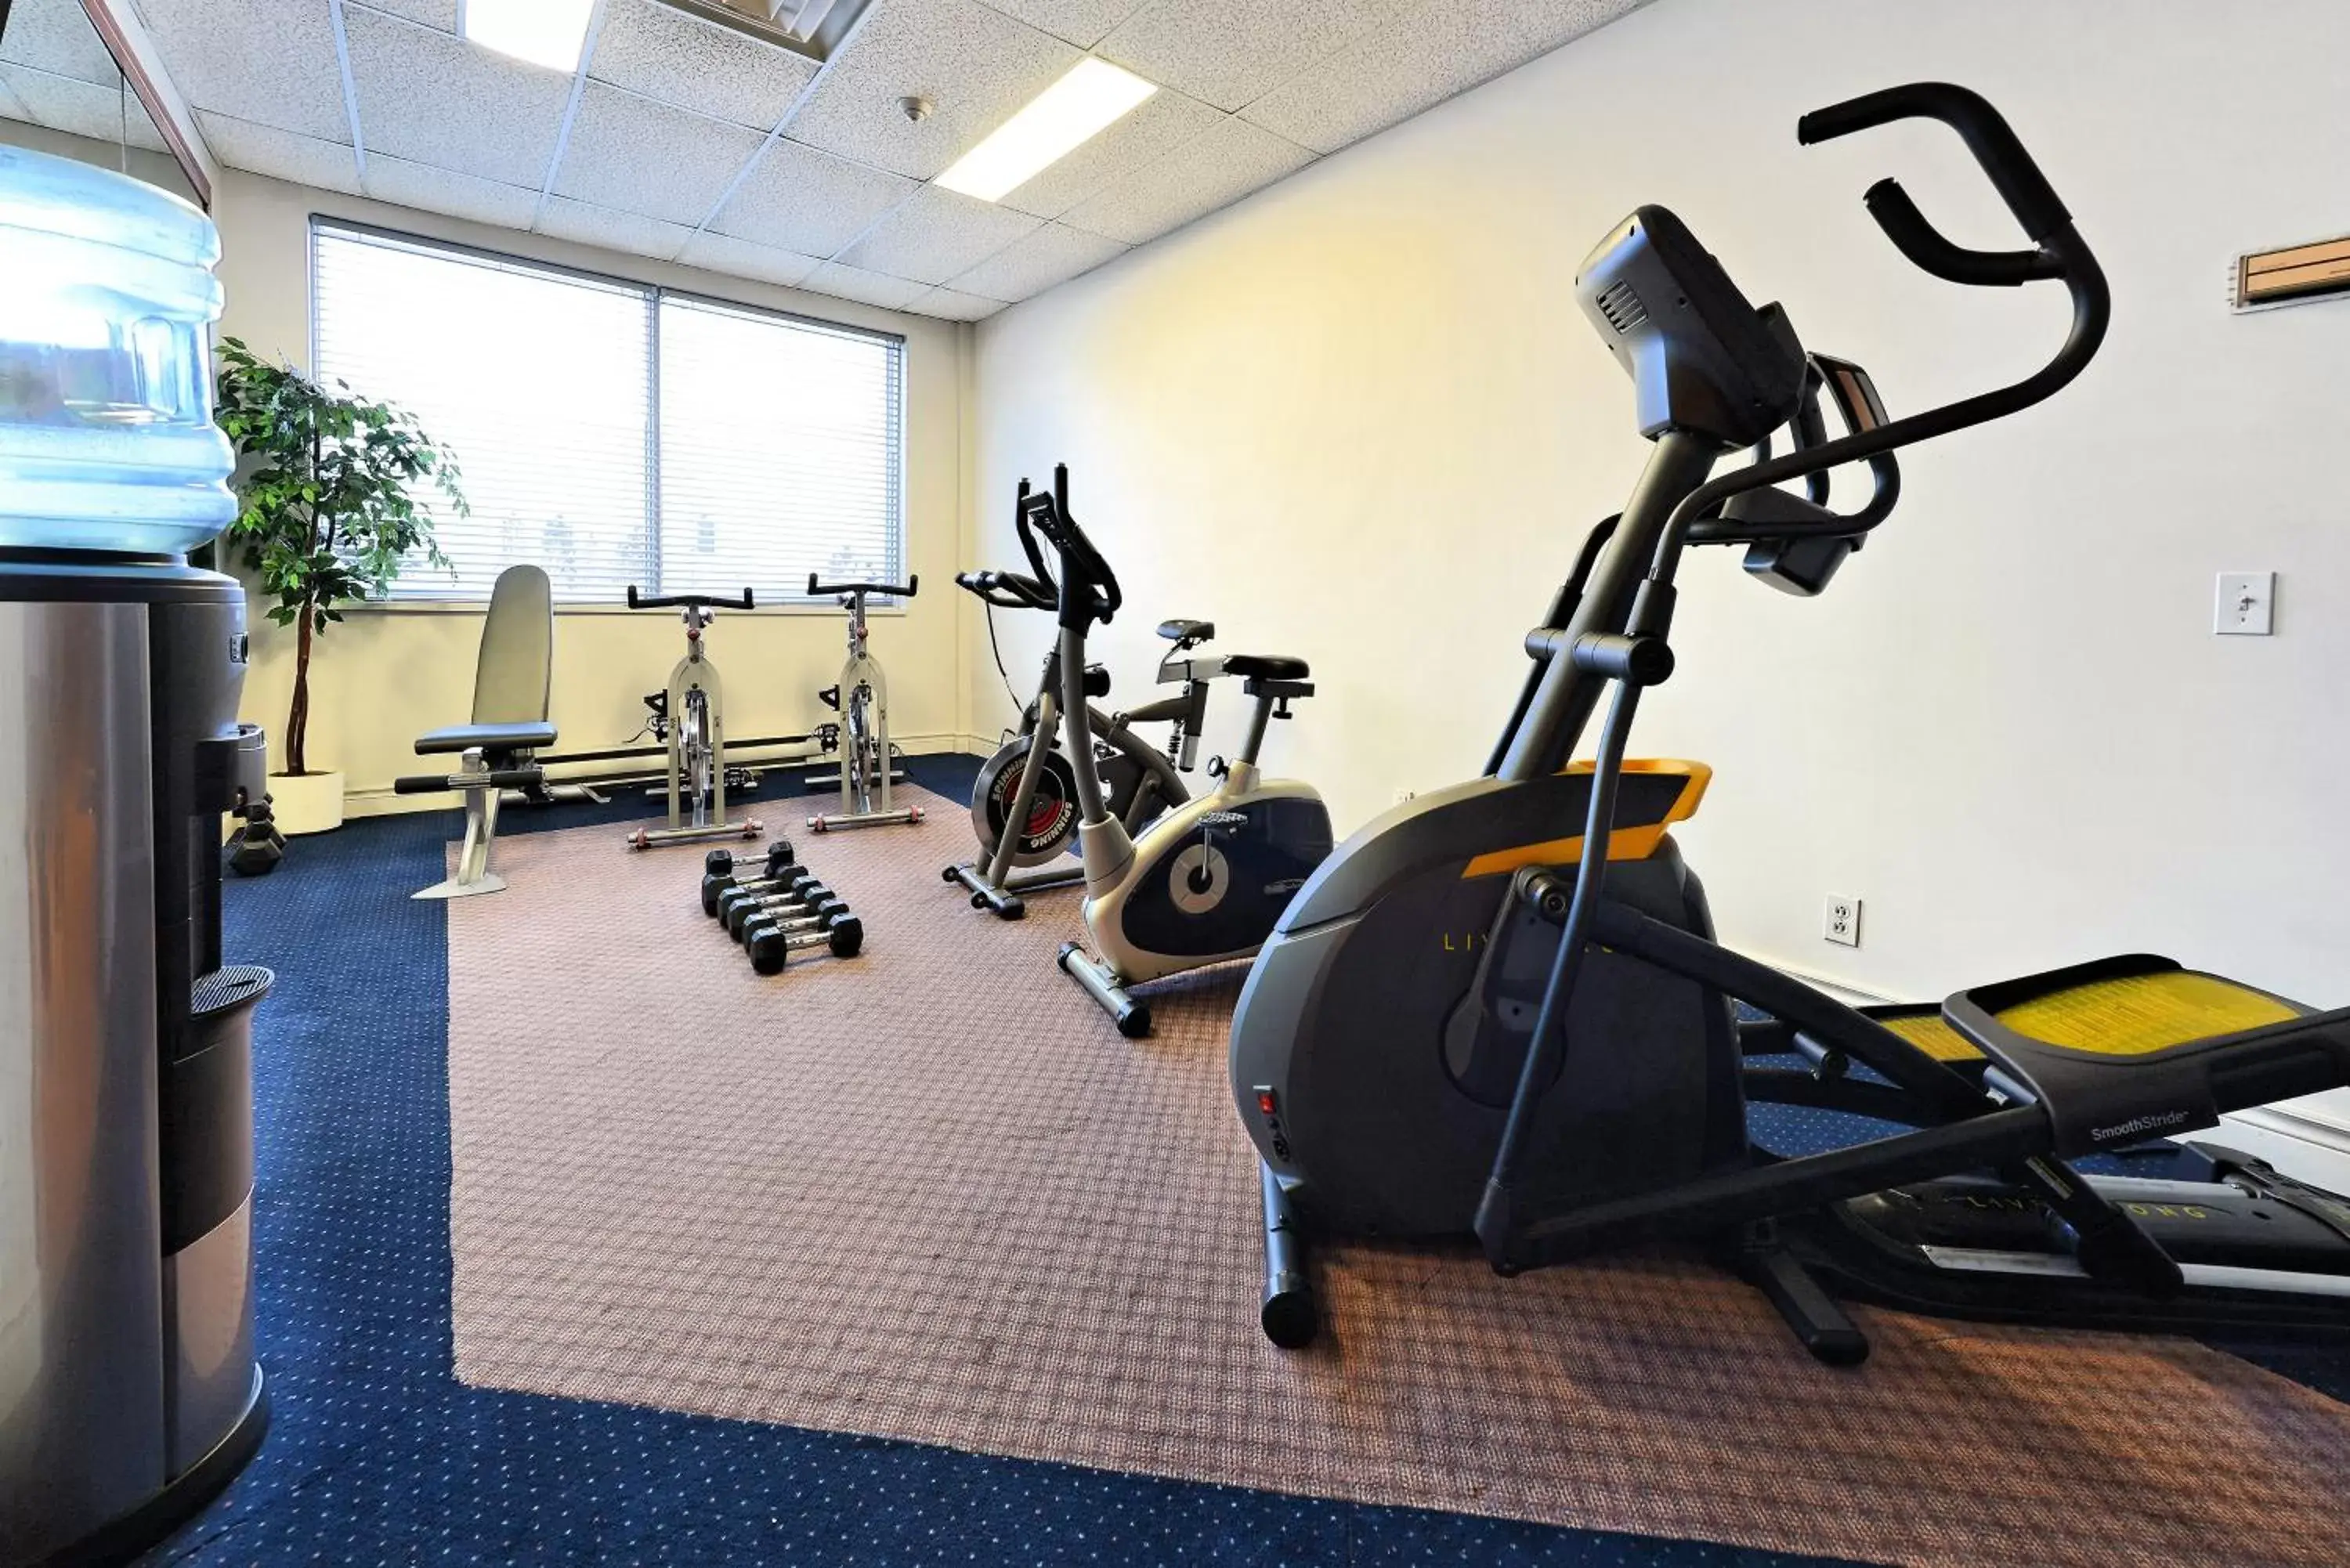 Fitness centre/facilities, Fitness Center/Facilities in Chateau Roberval